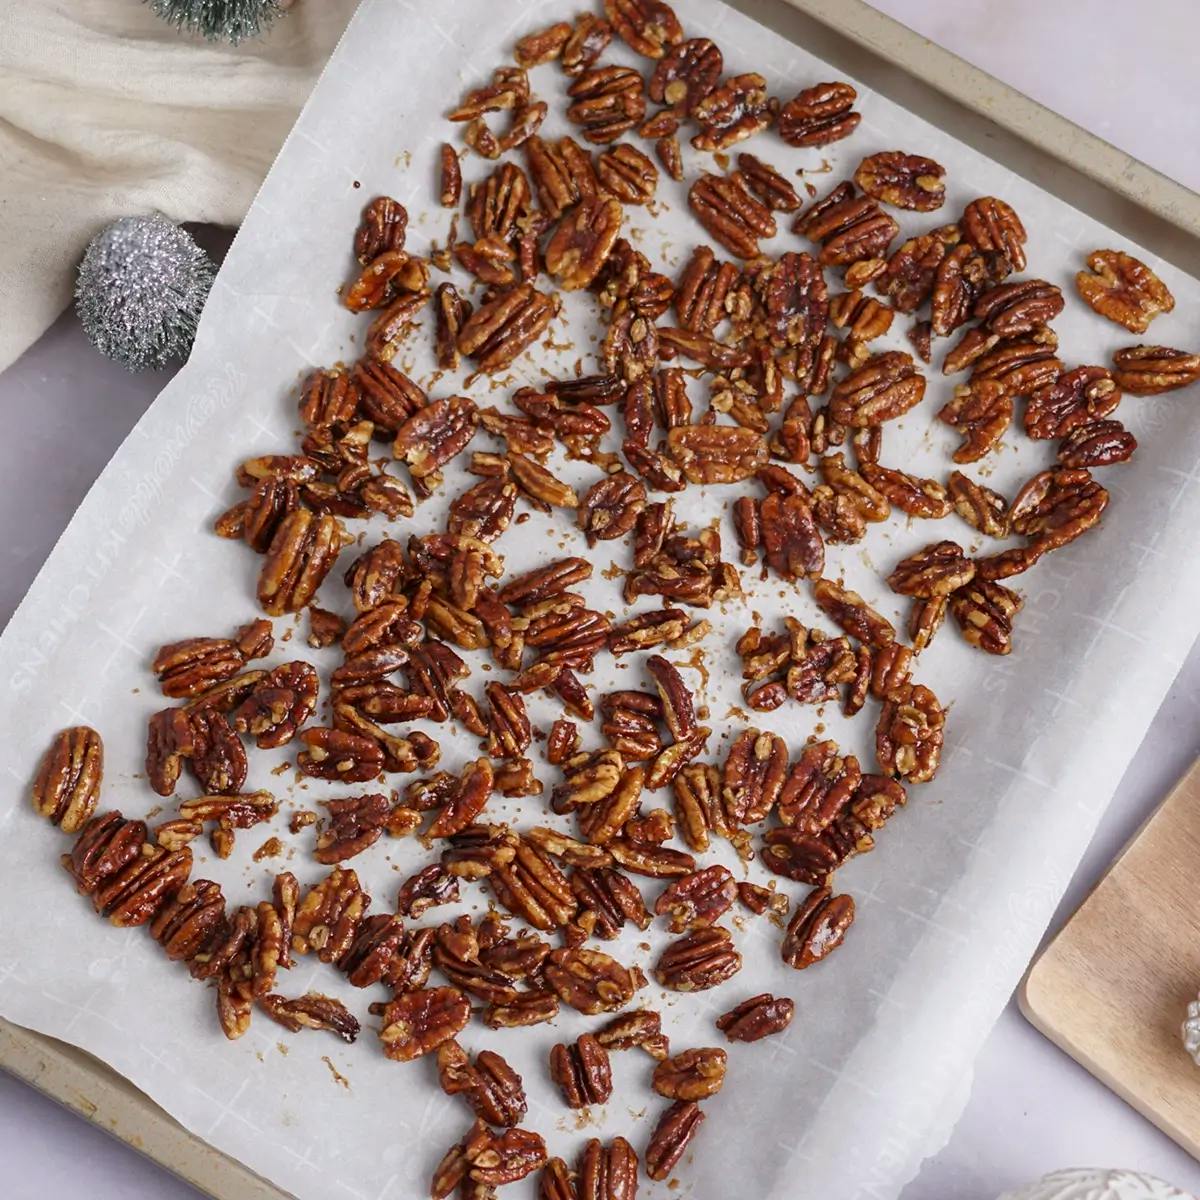 Pecans spread on a baking sheet to cool before being added to a holiday salad recipe.